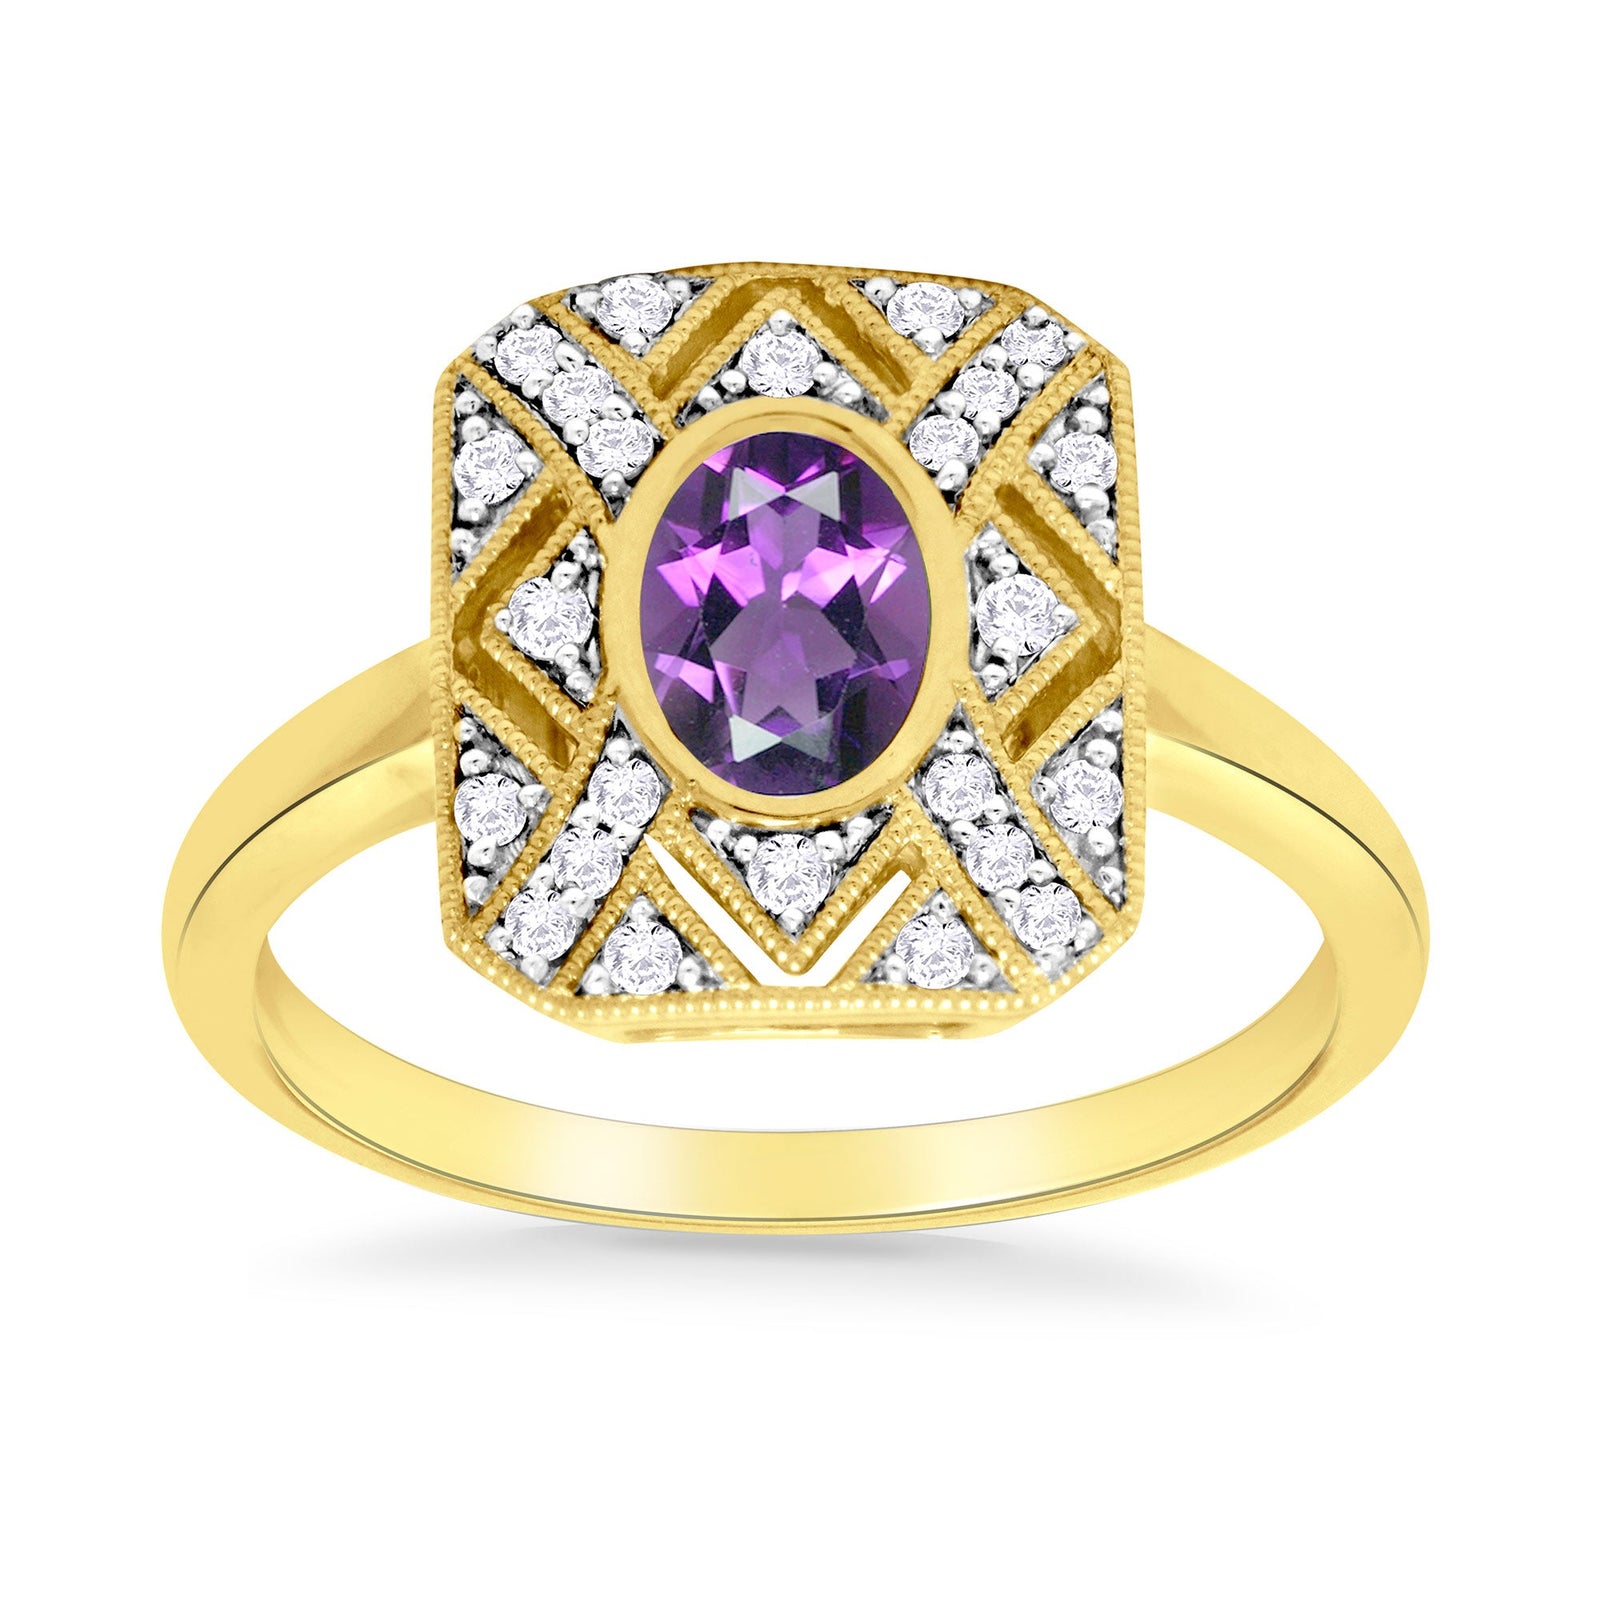 9ct gold 7x5mm oval amethyst & antique style diamond cluster ring 0.17ct